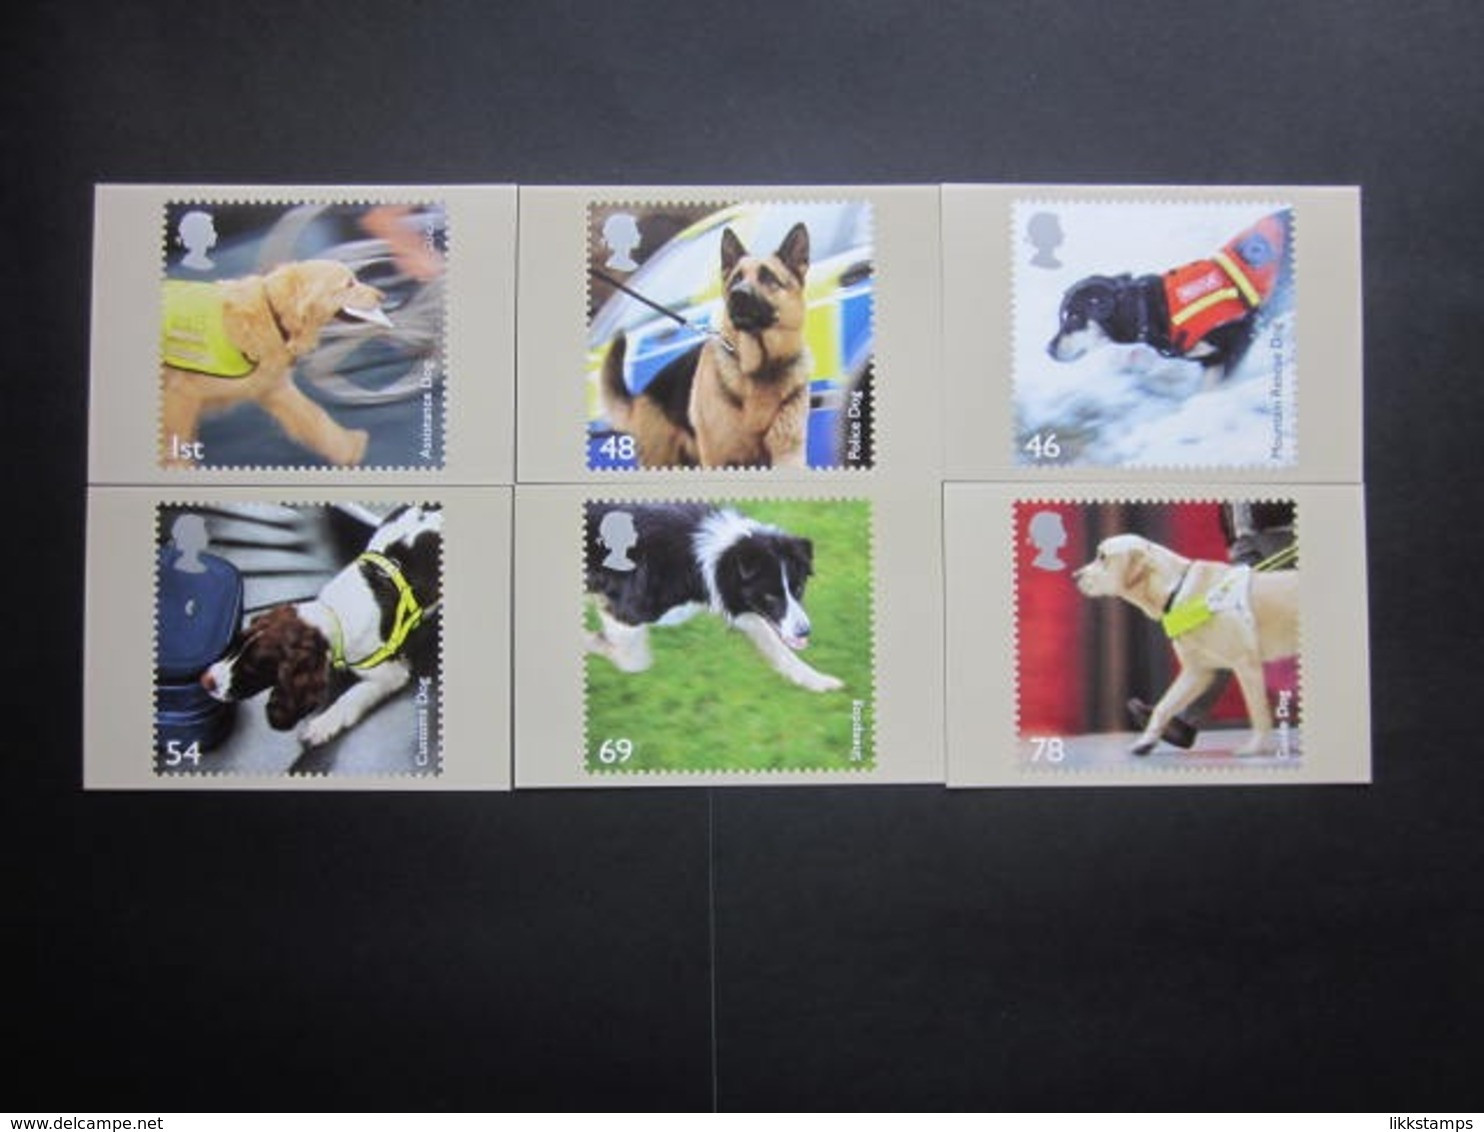 2008 WORKING DOGS P.H.Q. CARDS UNUSED, ISSUE No. 307 #00749 - Cartes PHQ